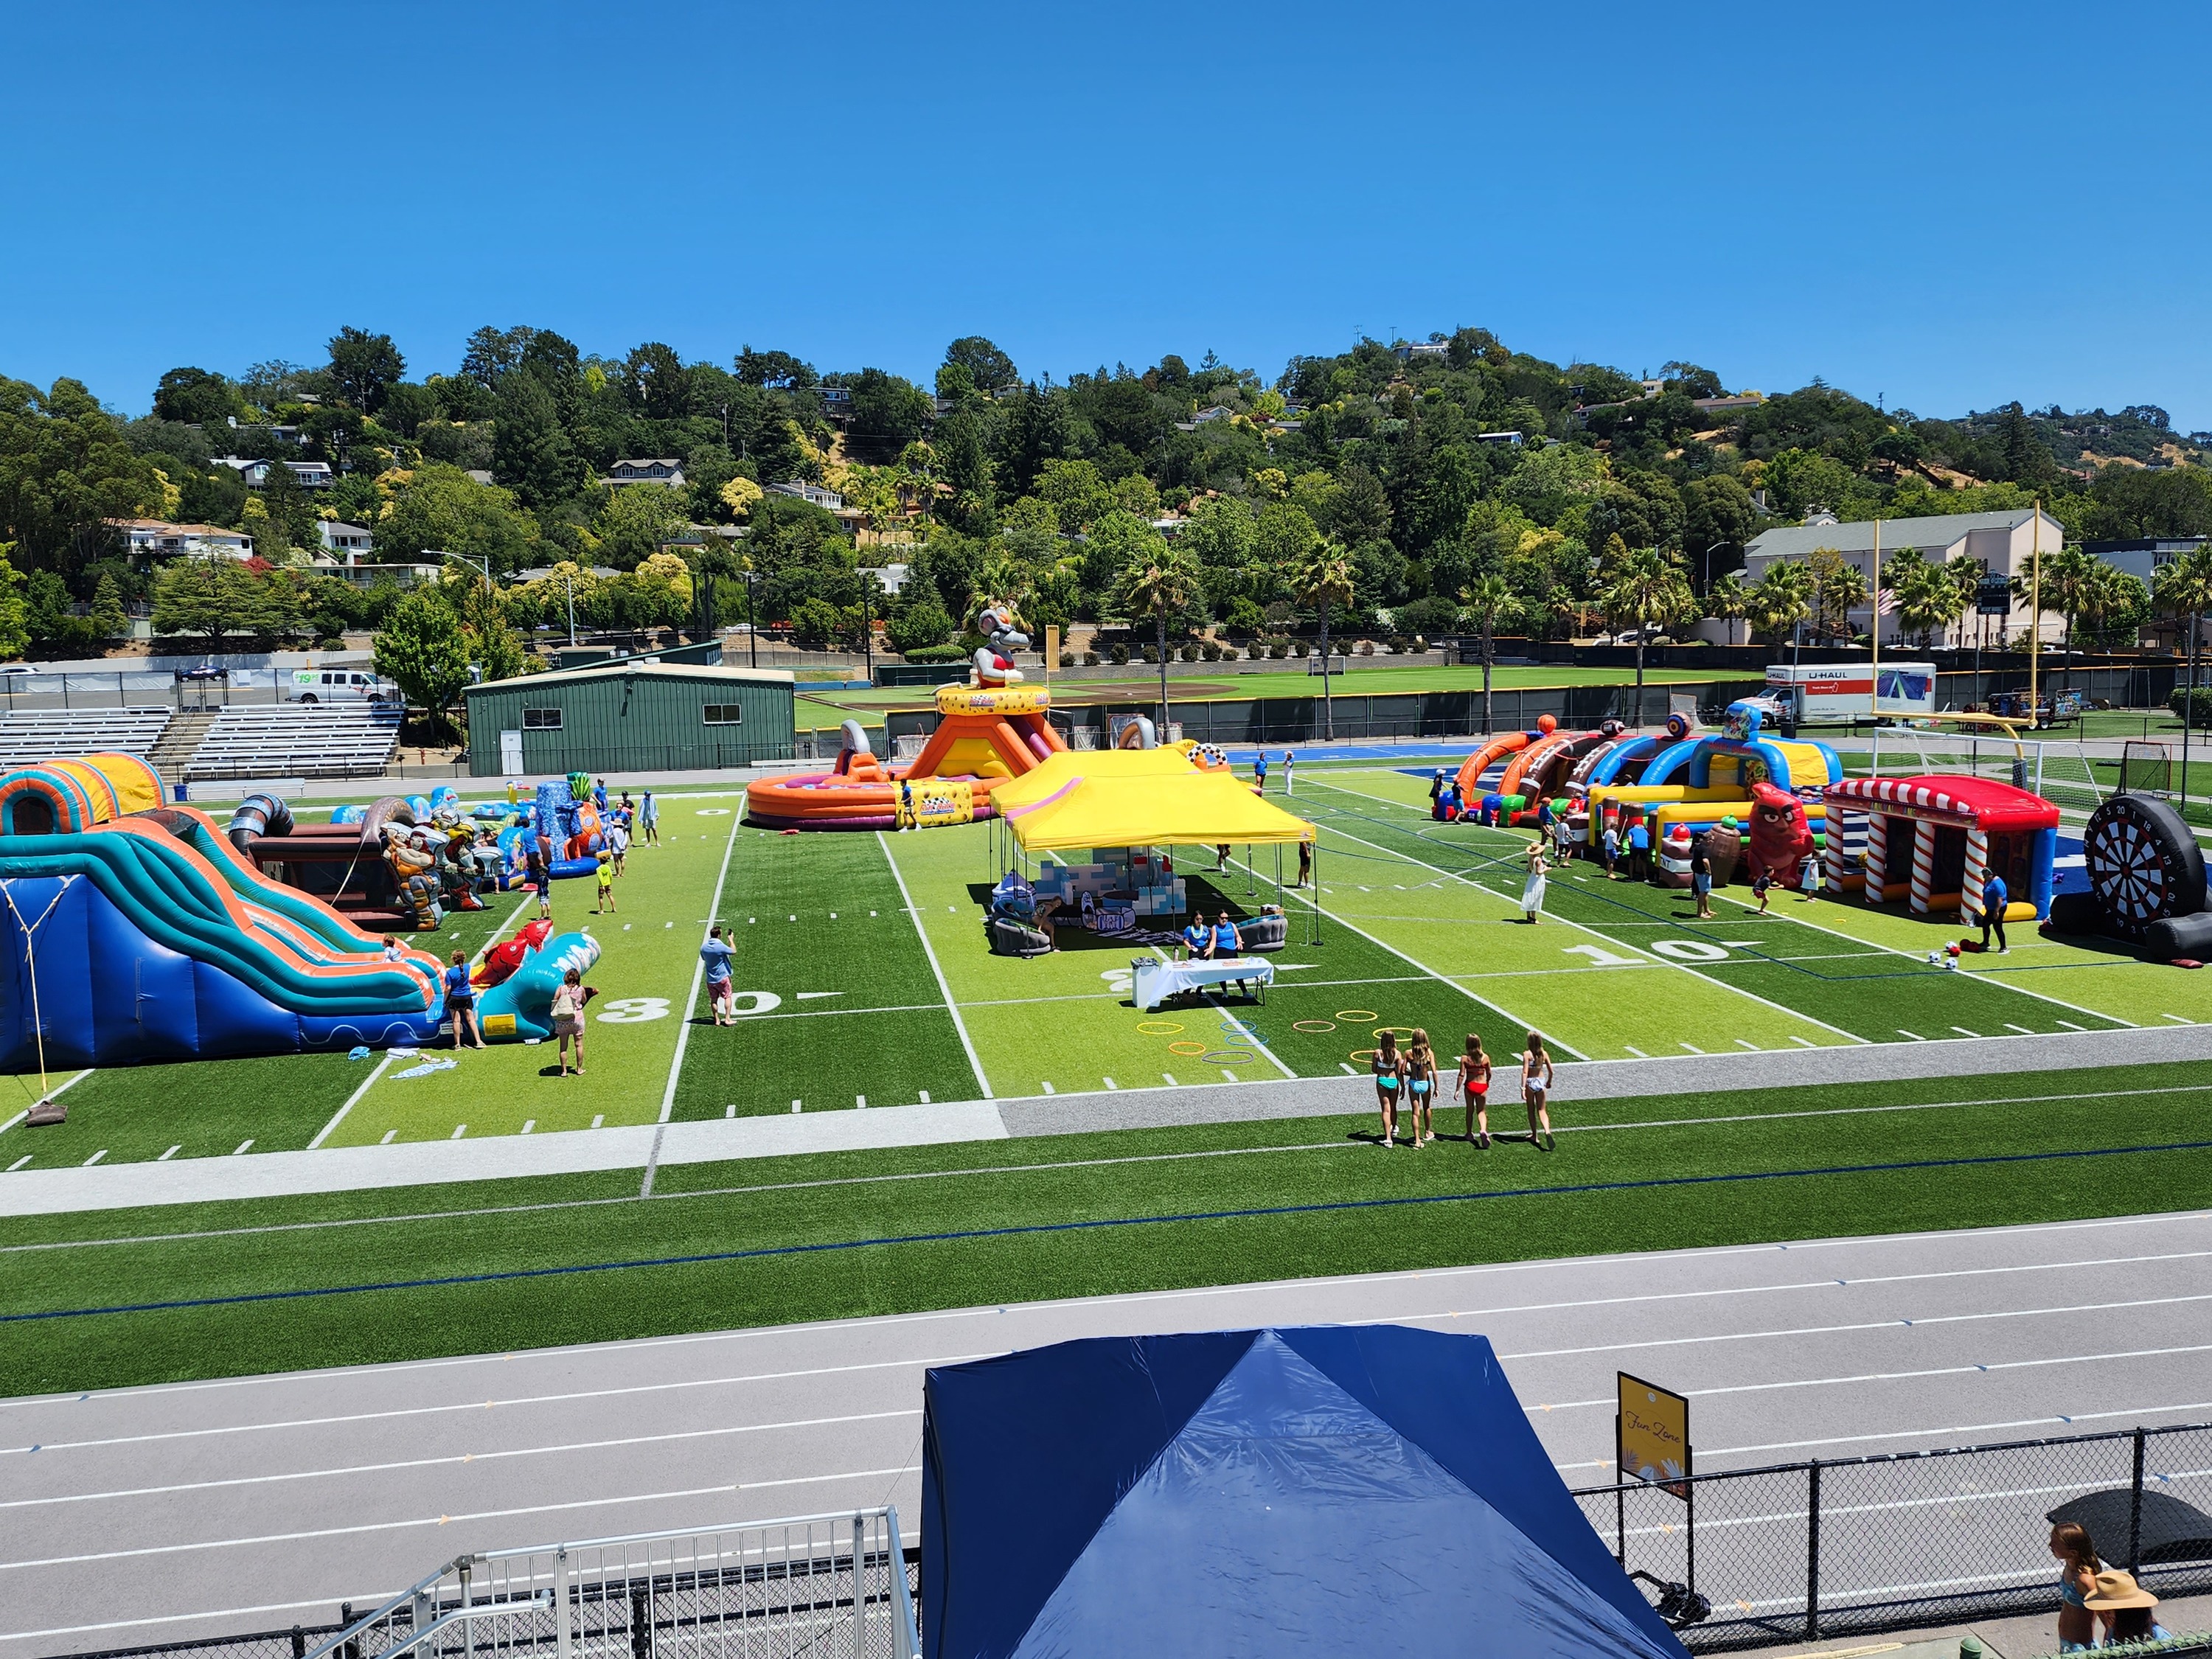 marin county inflatable game rentals